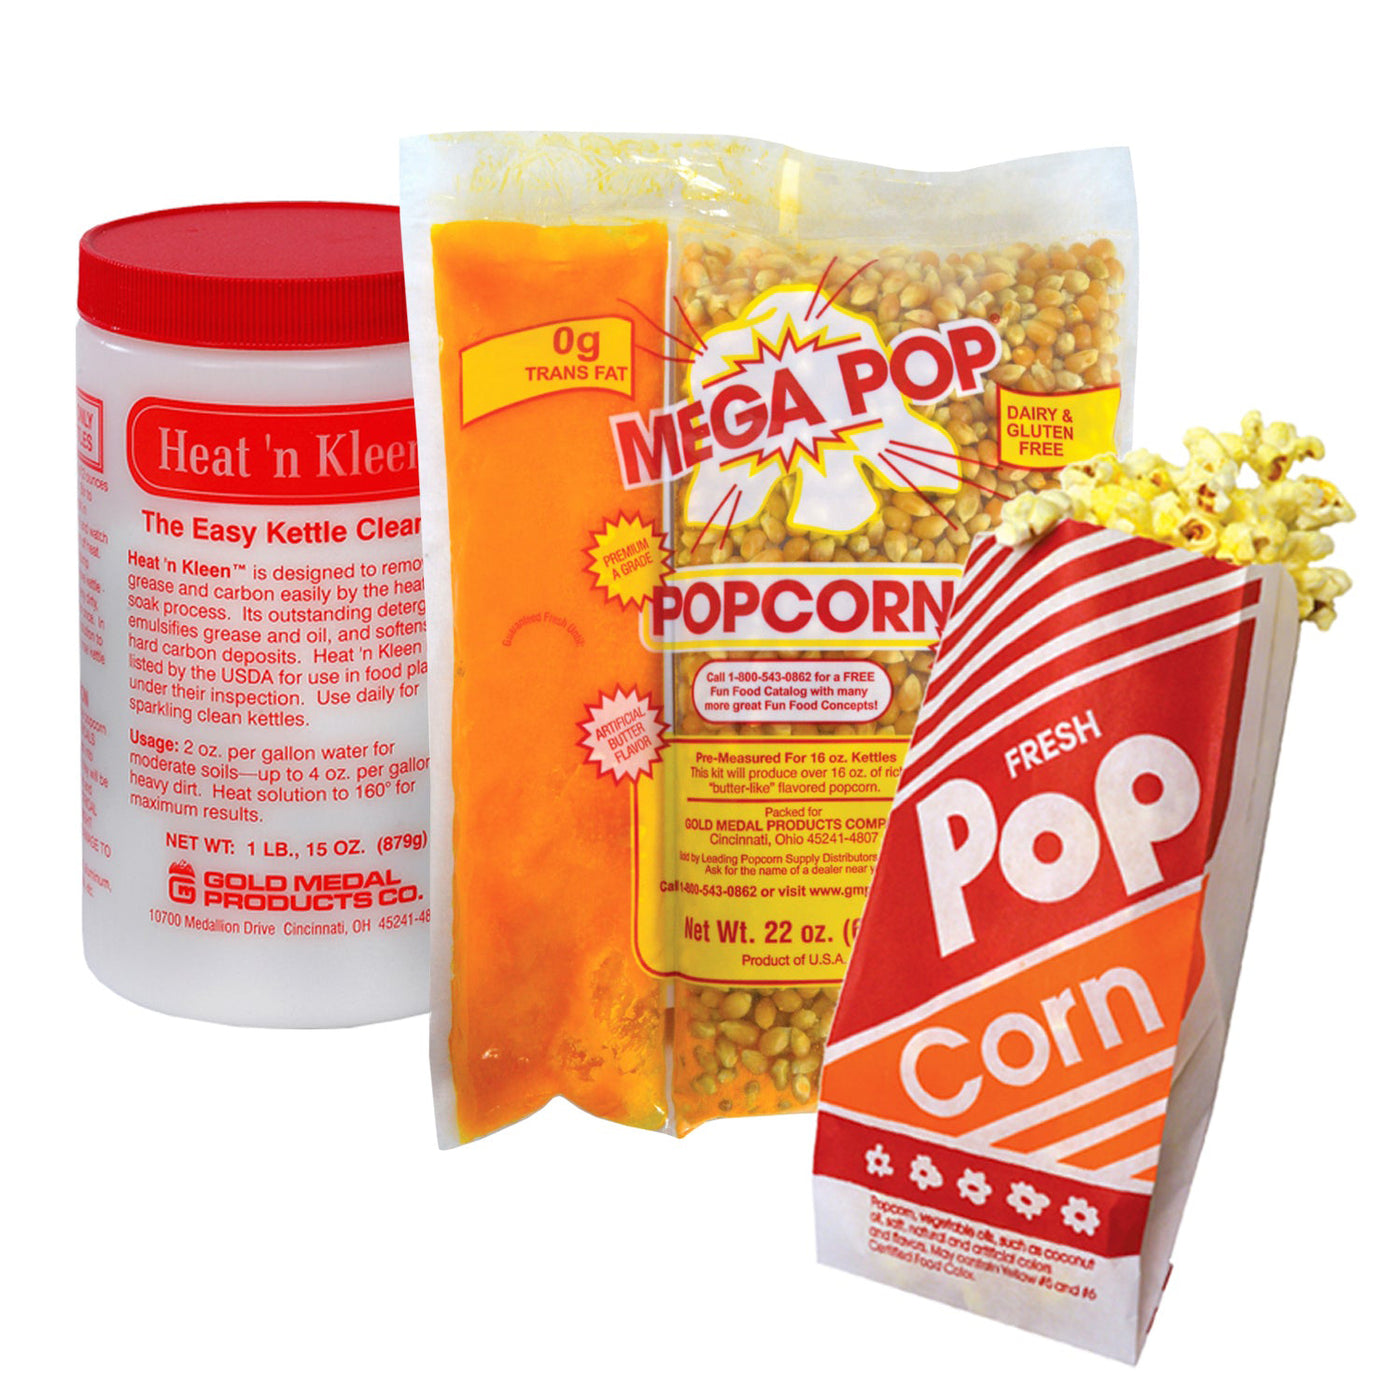 Popcorn Equipment & Supplies Starter Package for a 16-oz. Popcorn